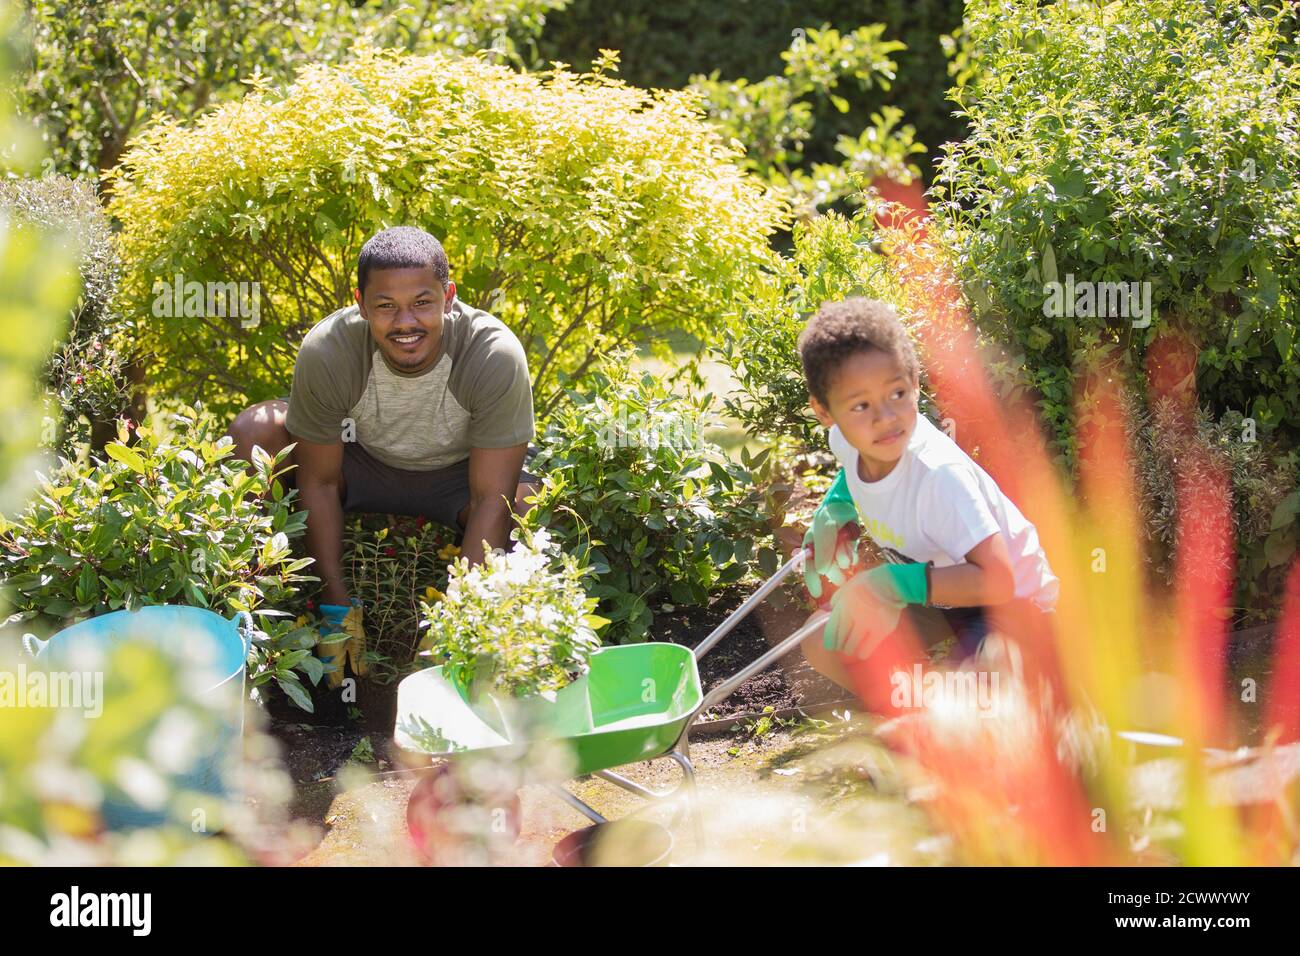 Father and son gardening in sunny summer garden Stock Photo